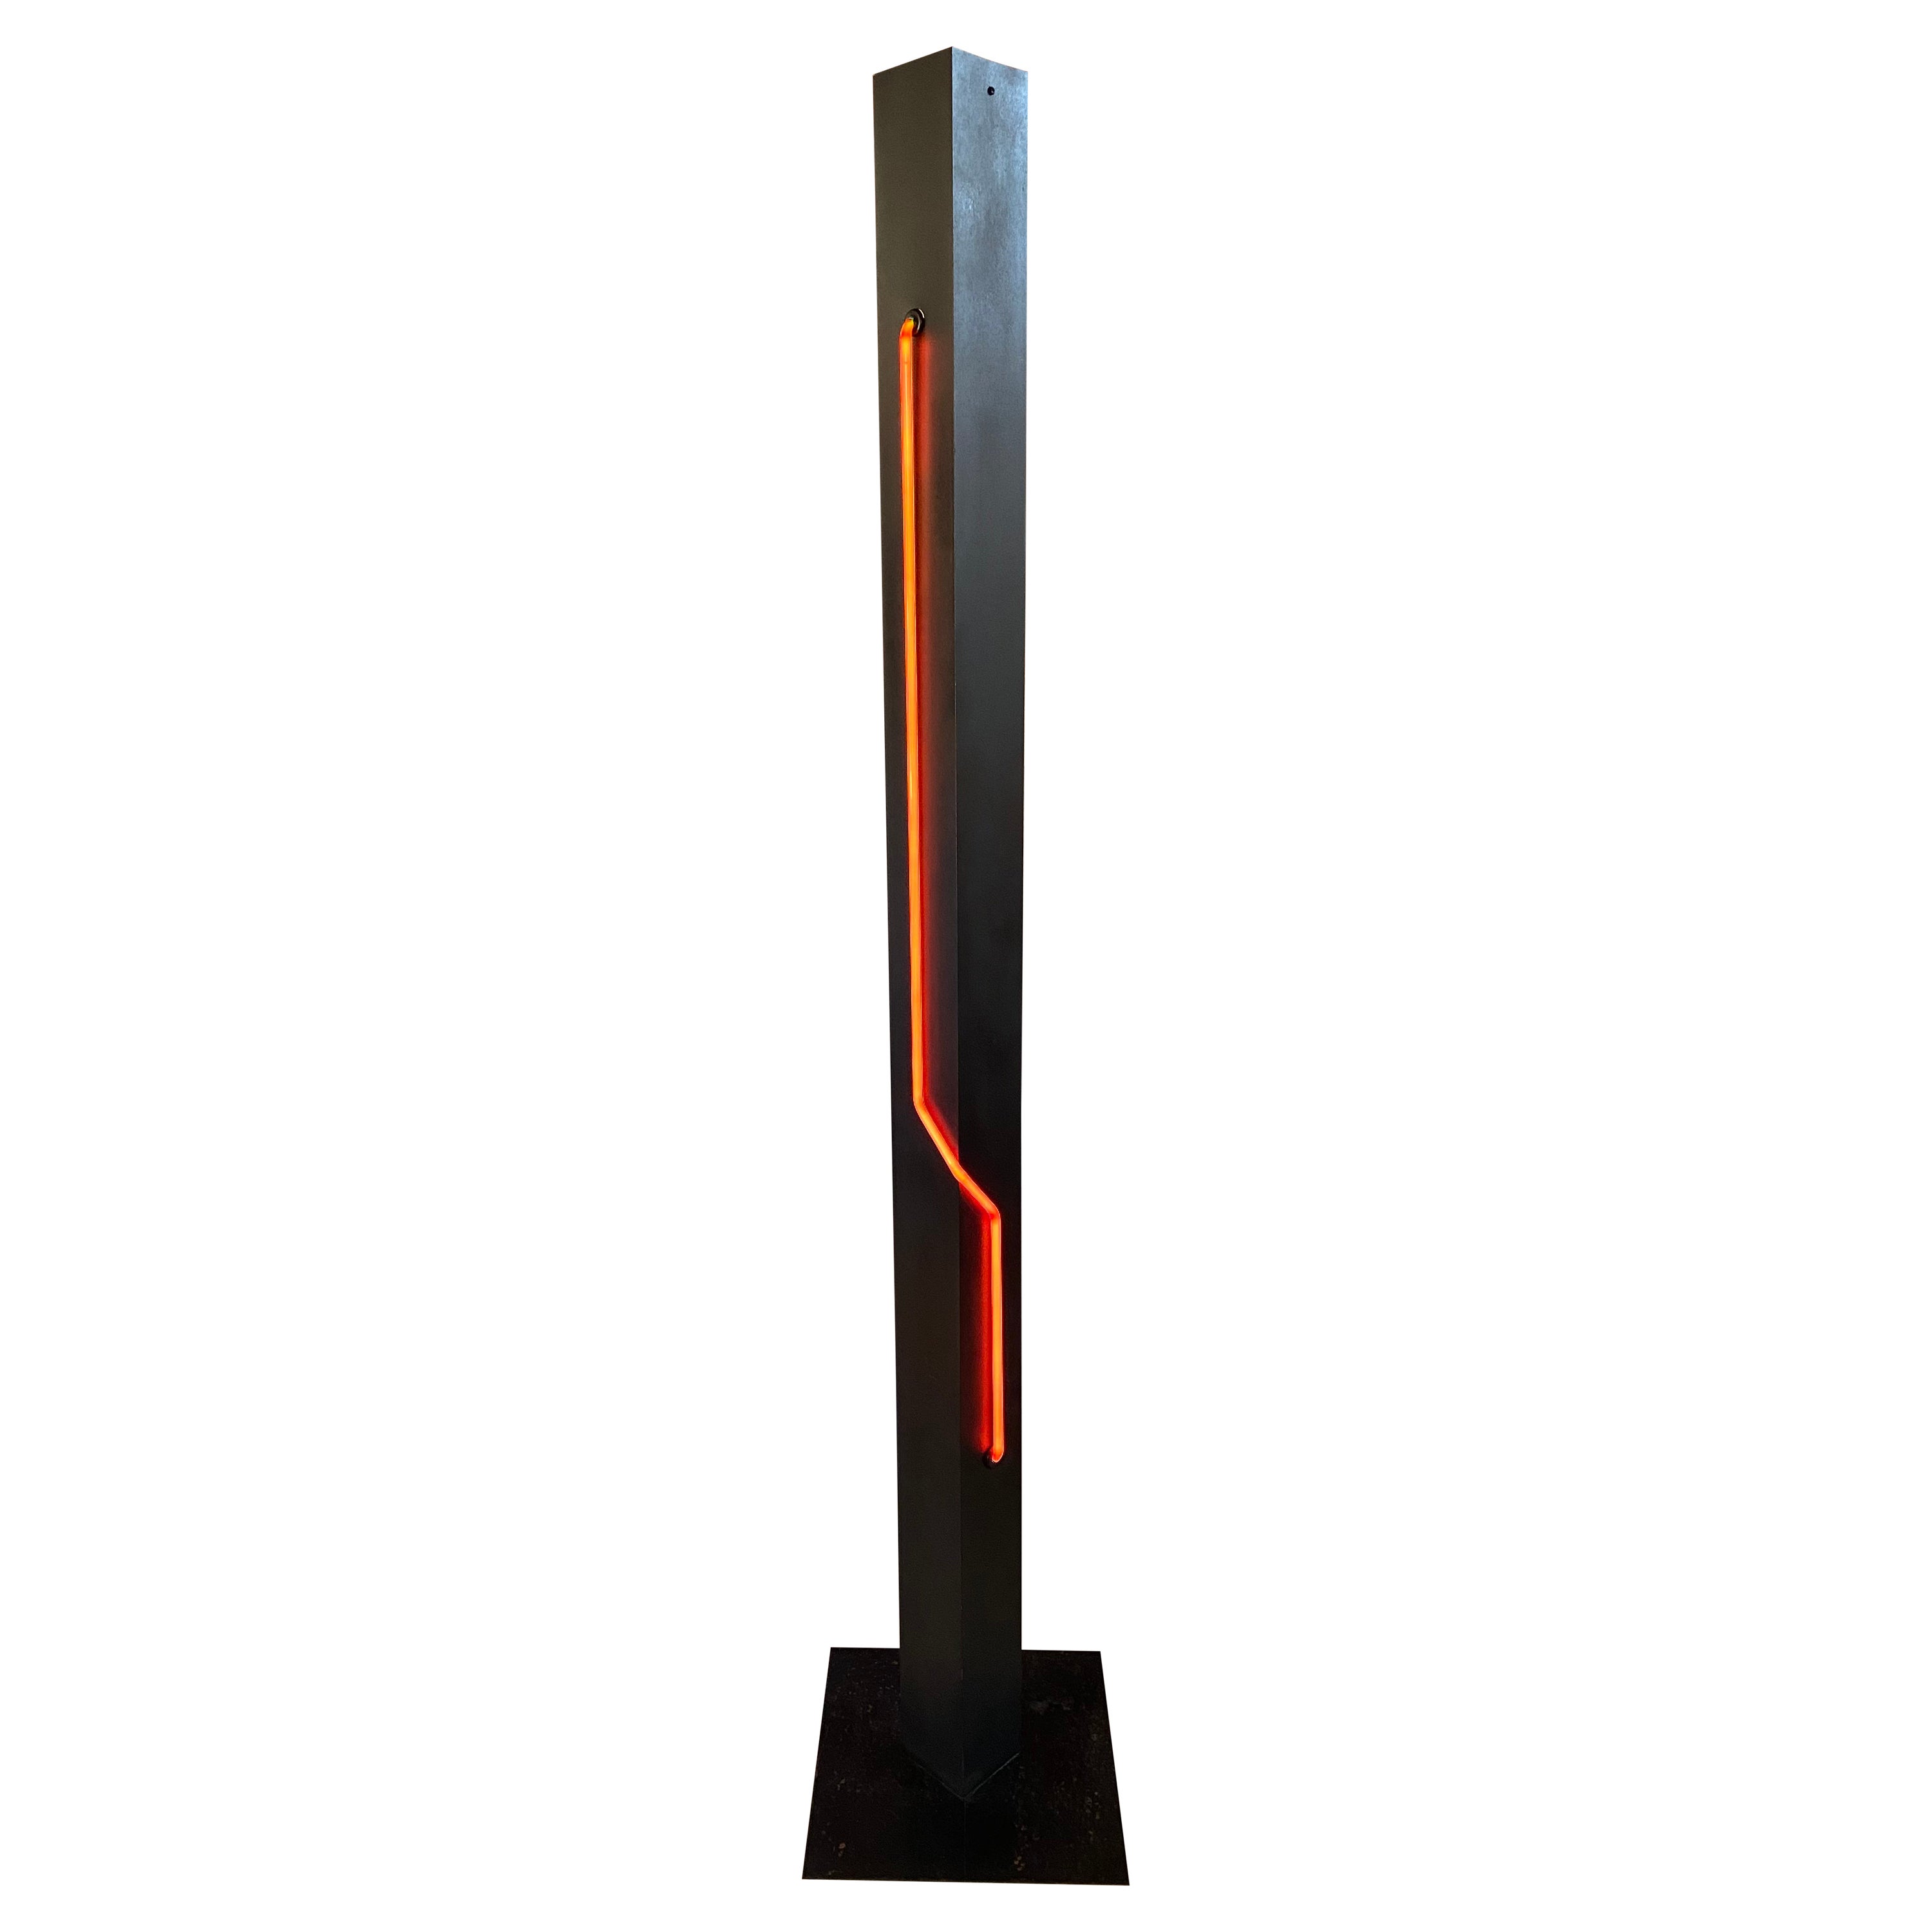 Neon Sculpture & Torchiere Lamp by Rudi Stern for Let There Be Neon, circa 1976